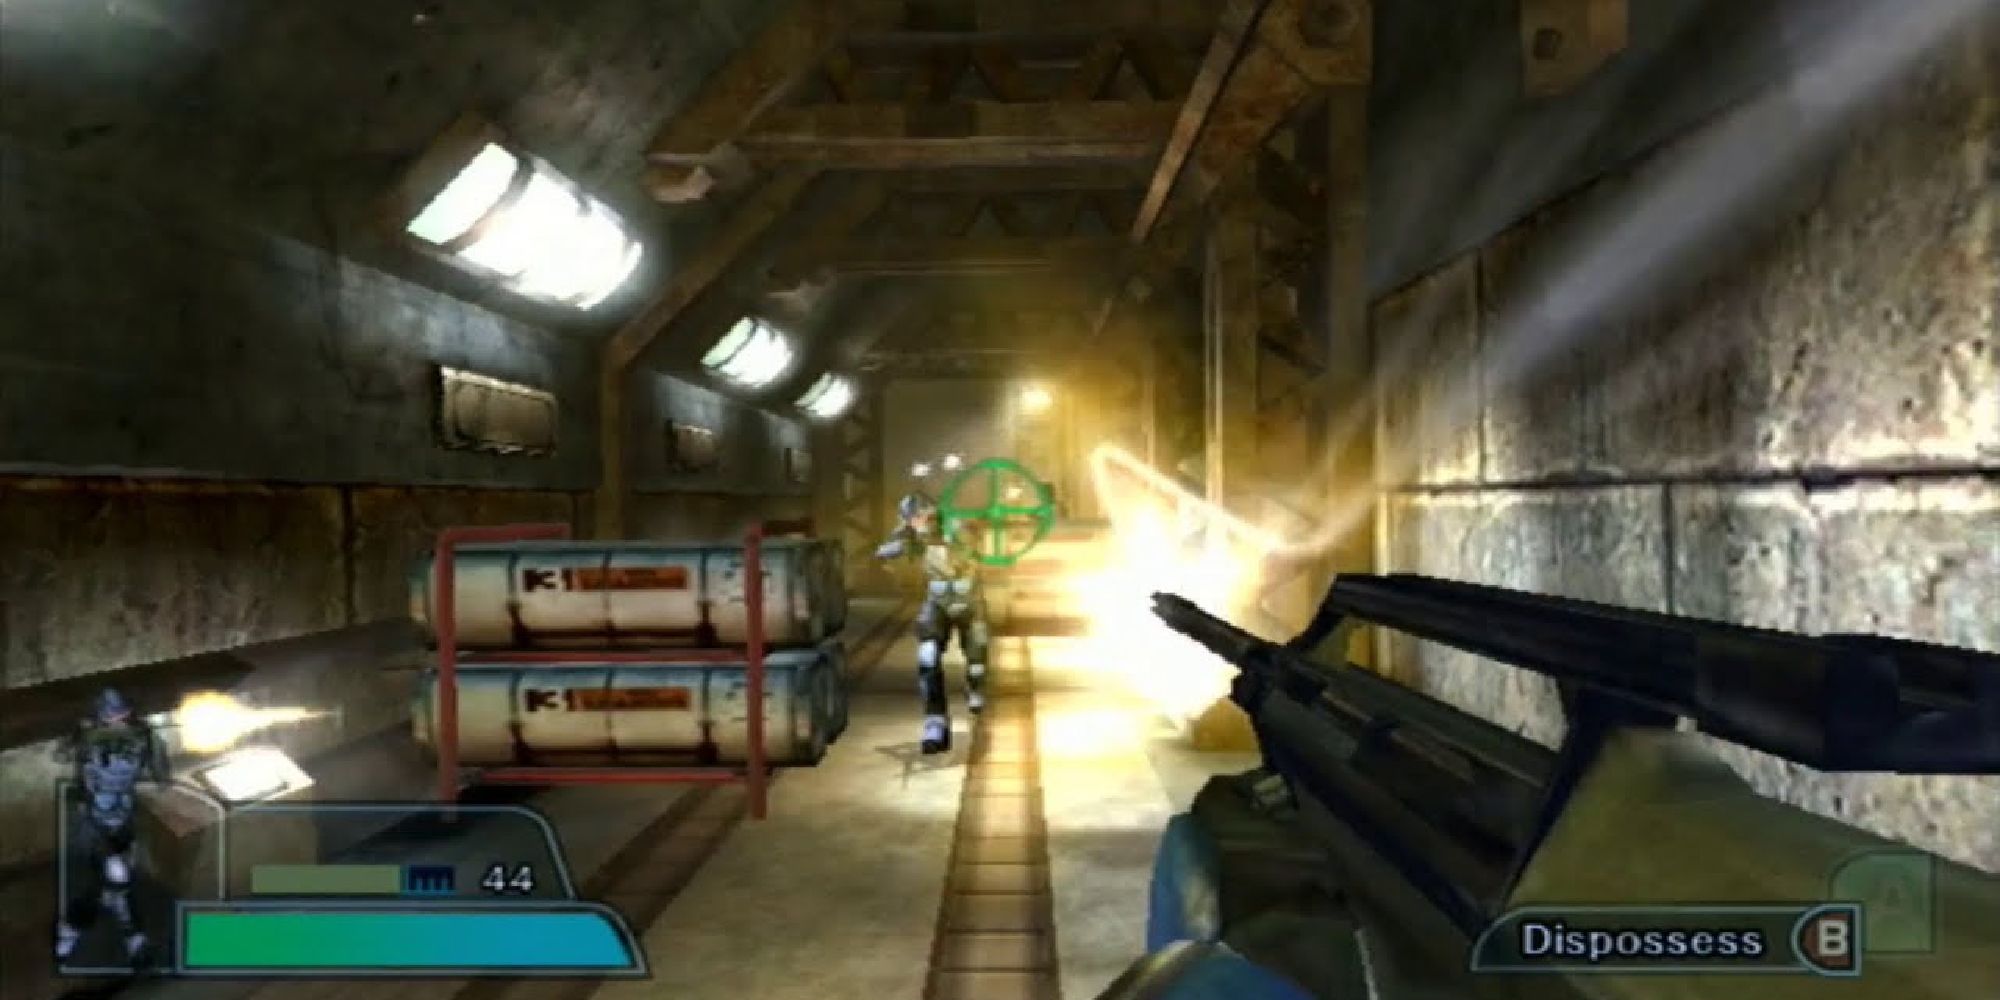 Gameplay from Geist, demonstrating its FPs mechanics.